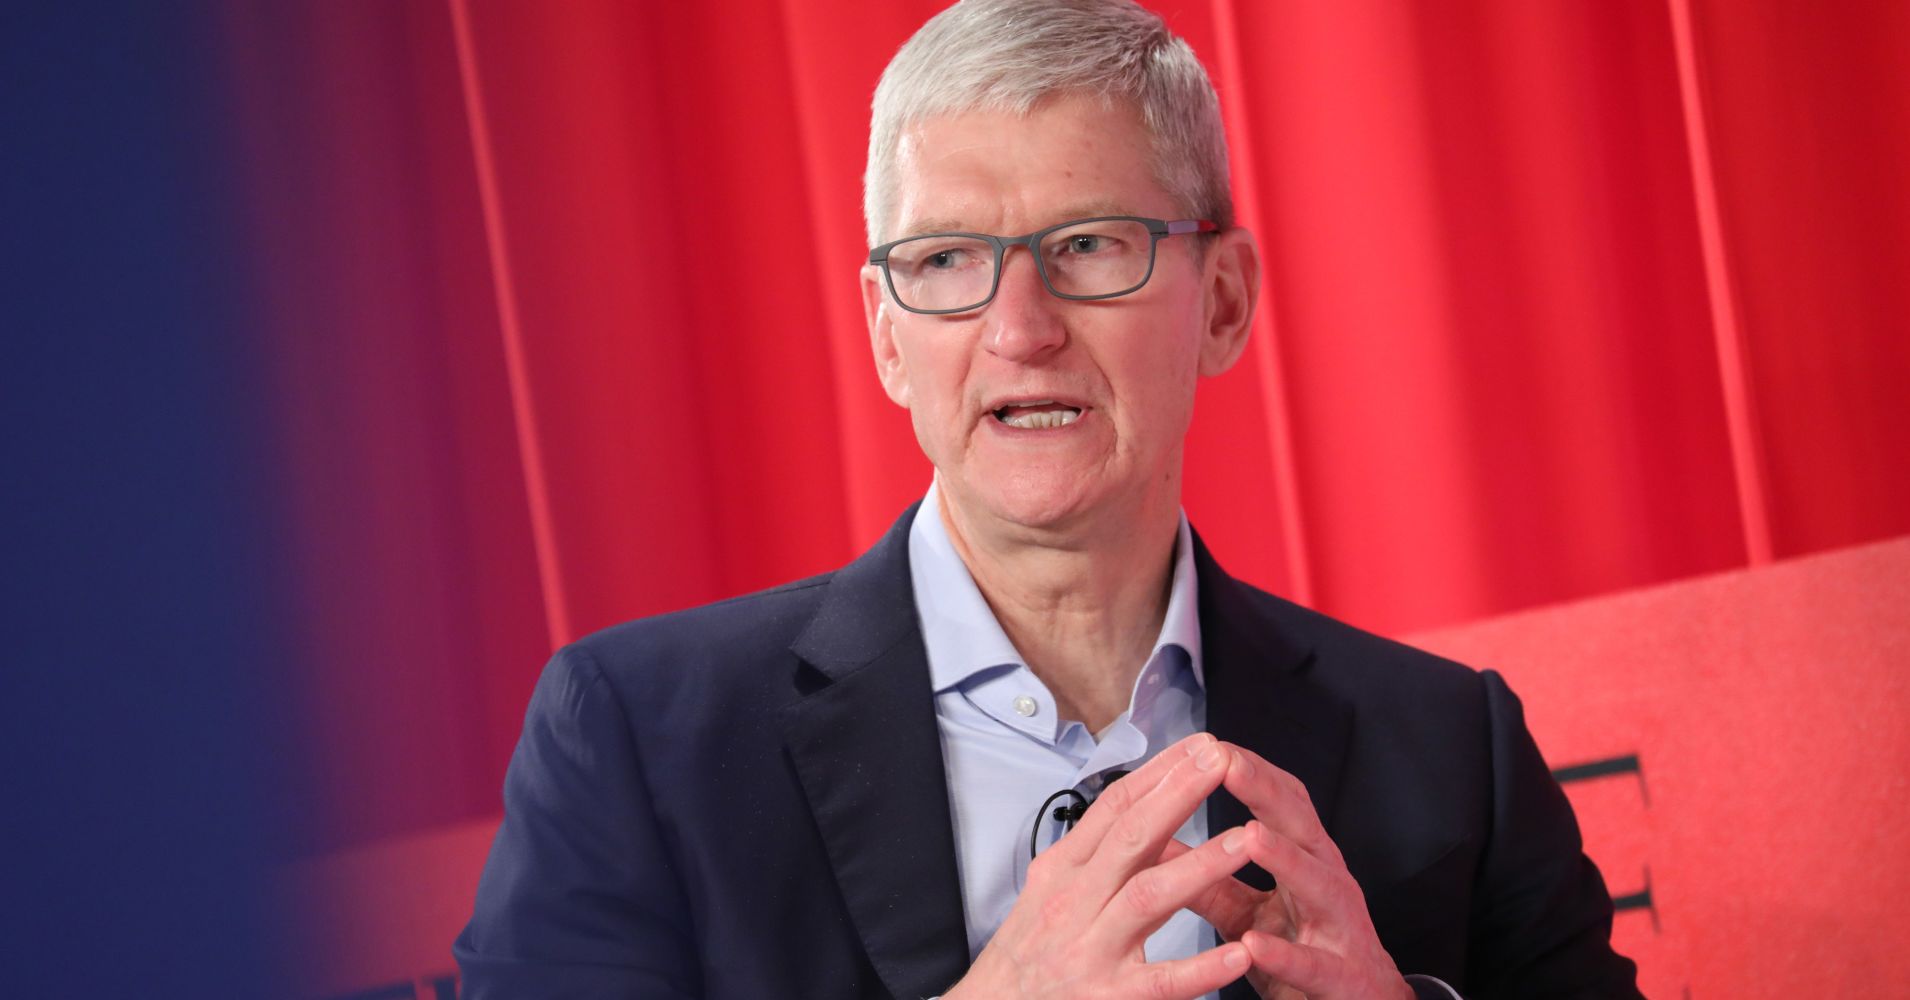 Tim Cook participates in a panel discussion during the TIME 100 Summit 2019 on April 23, 2019 in New York City.